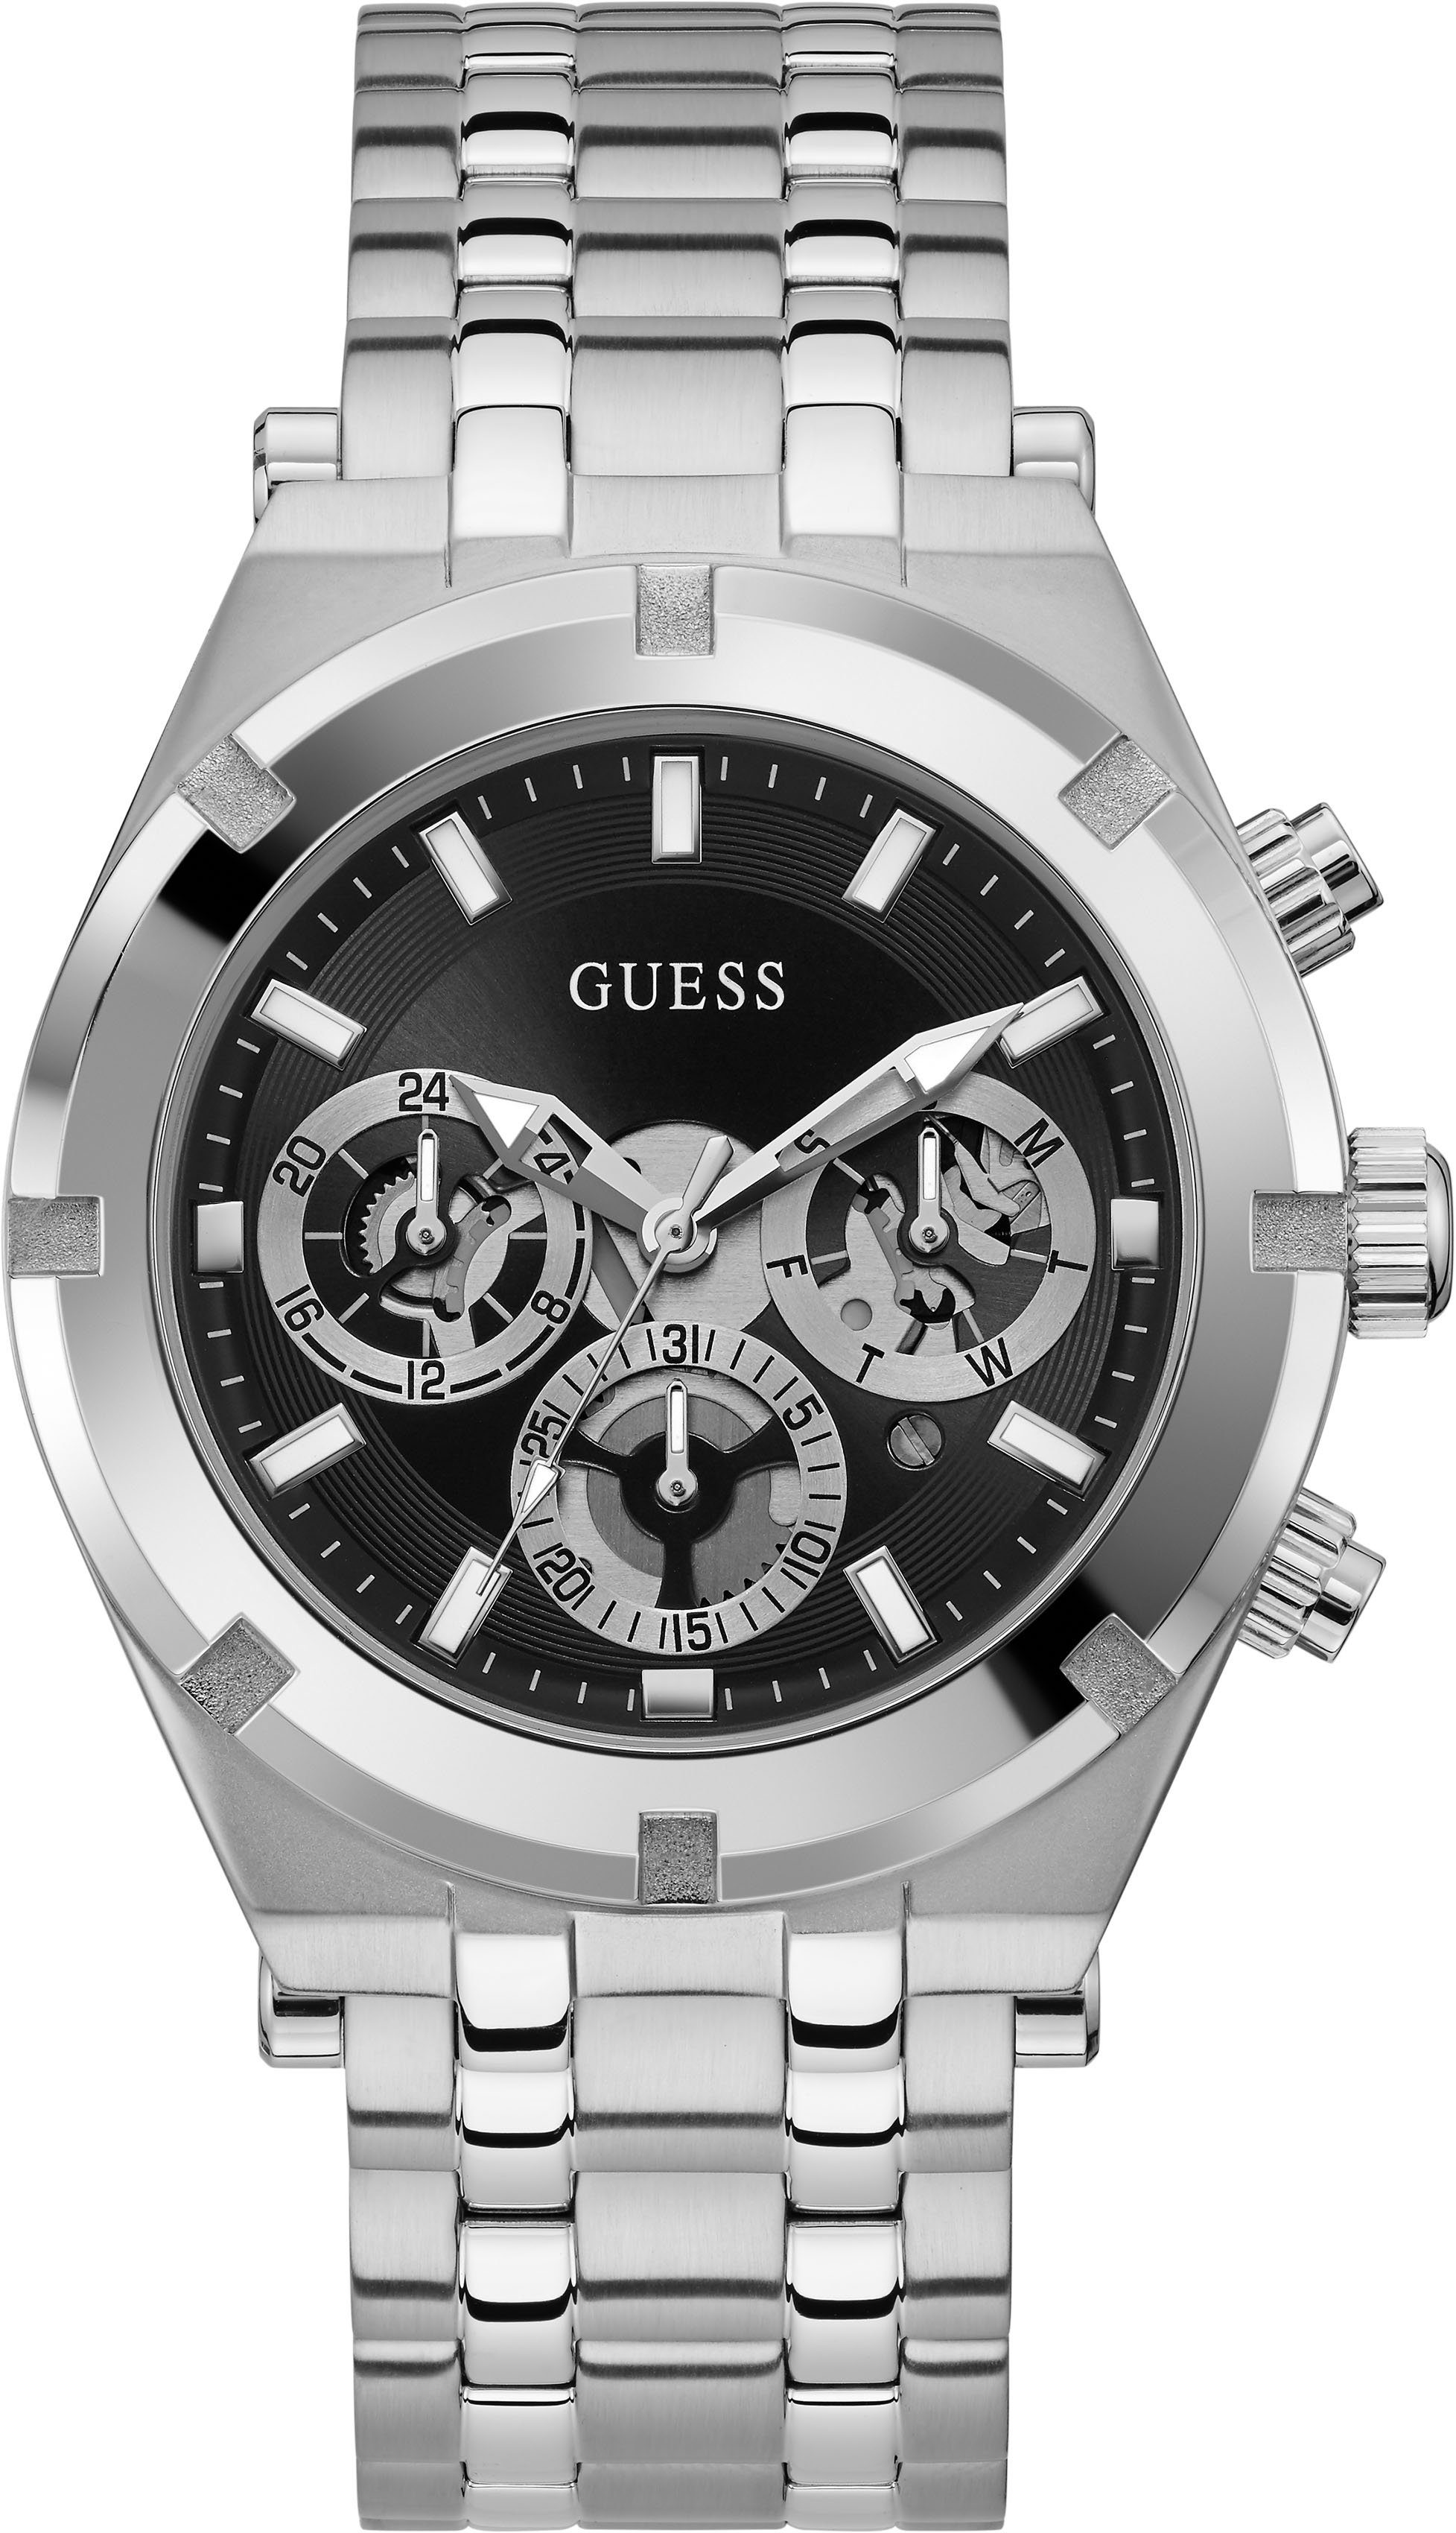 Guess Multifunktionsuhr CONTINENTAL, GW0260G1